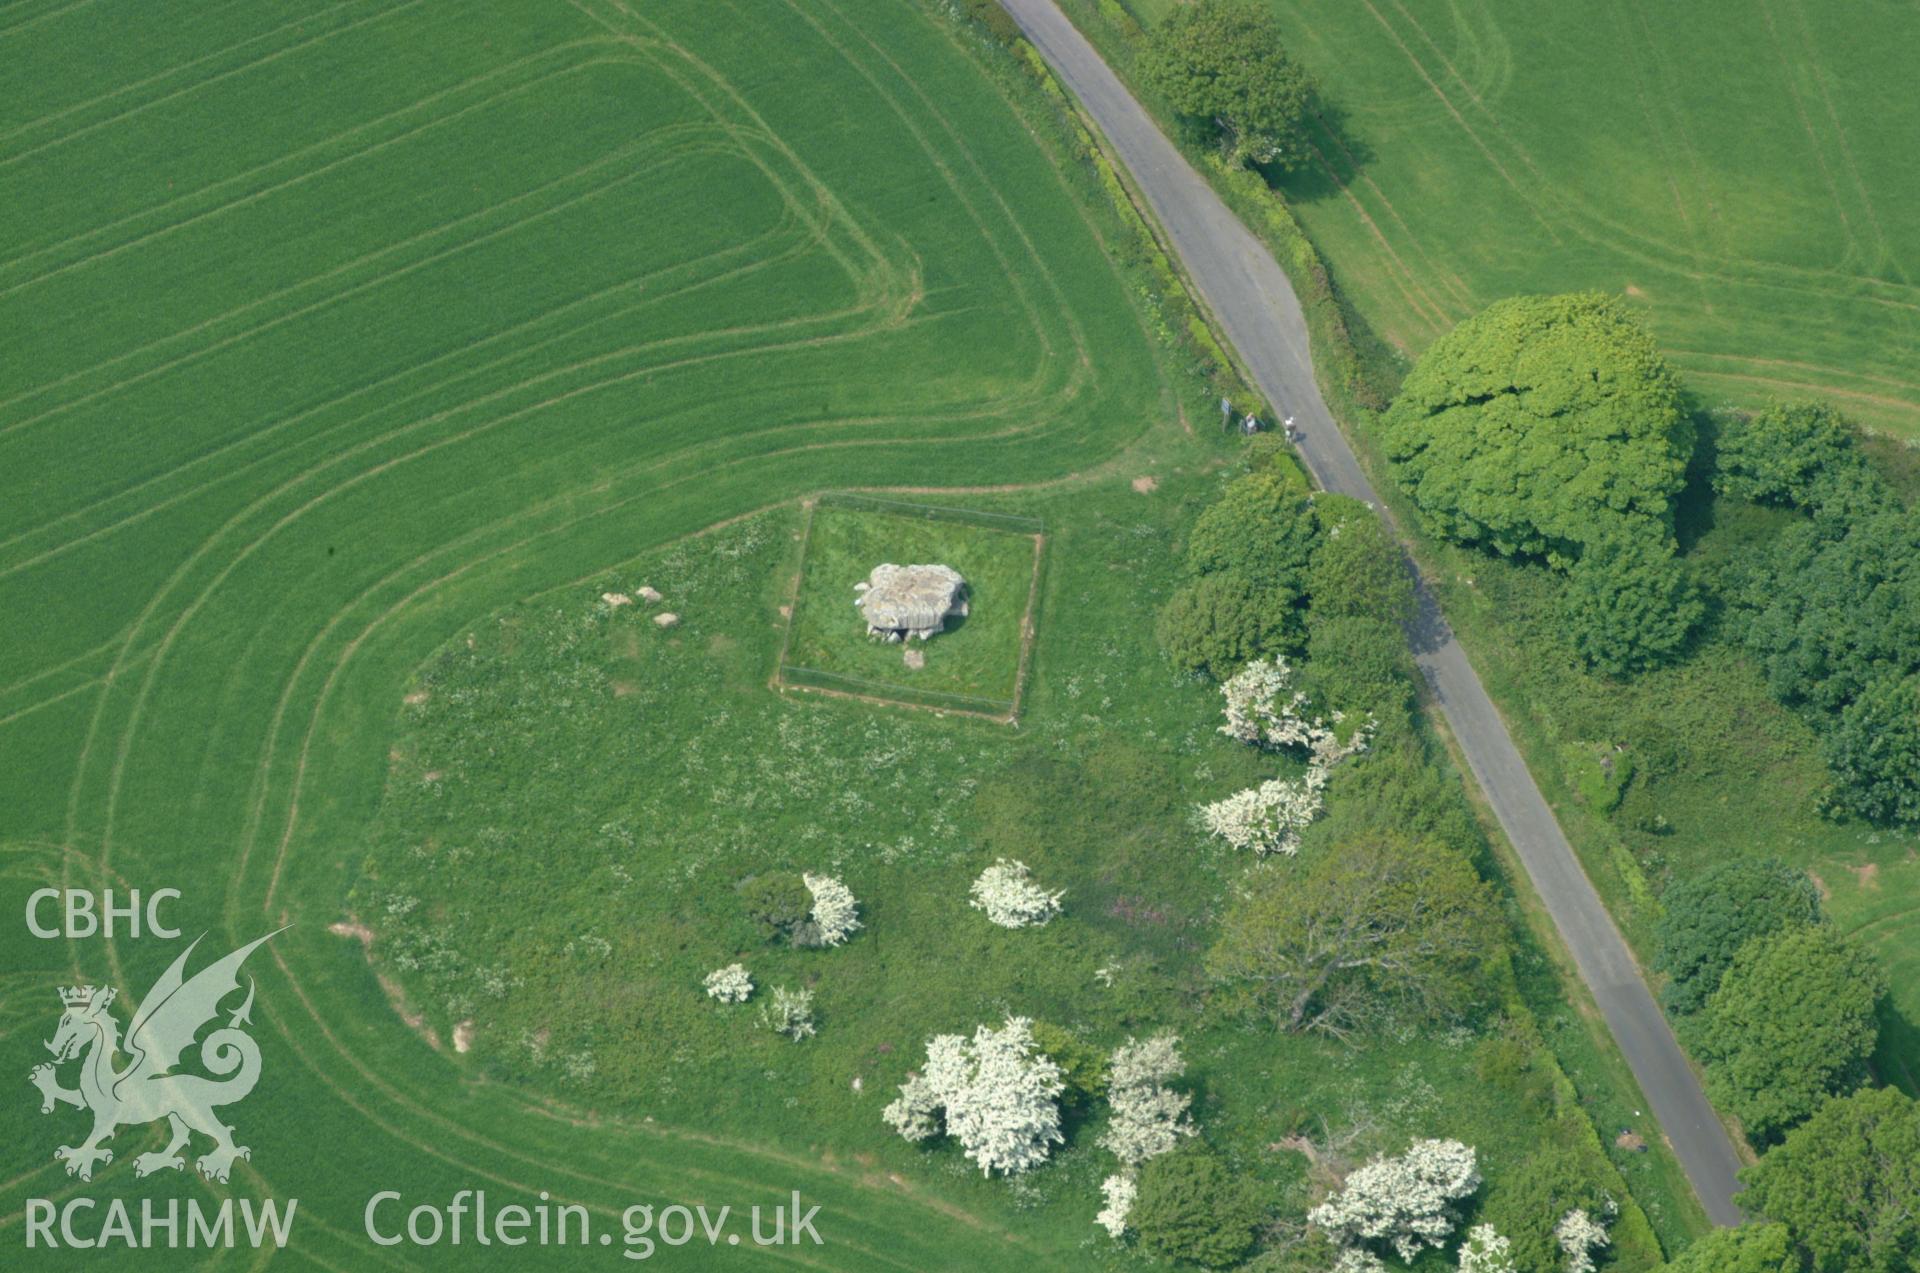 RCAHMW colour oblique aerial photograph of Lligwy Burial Chamber taken on 26/05/2004 by Toby Driver